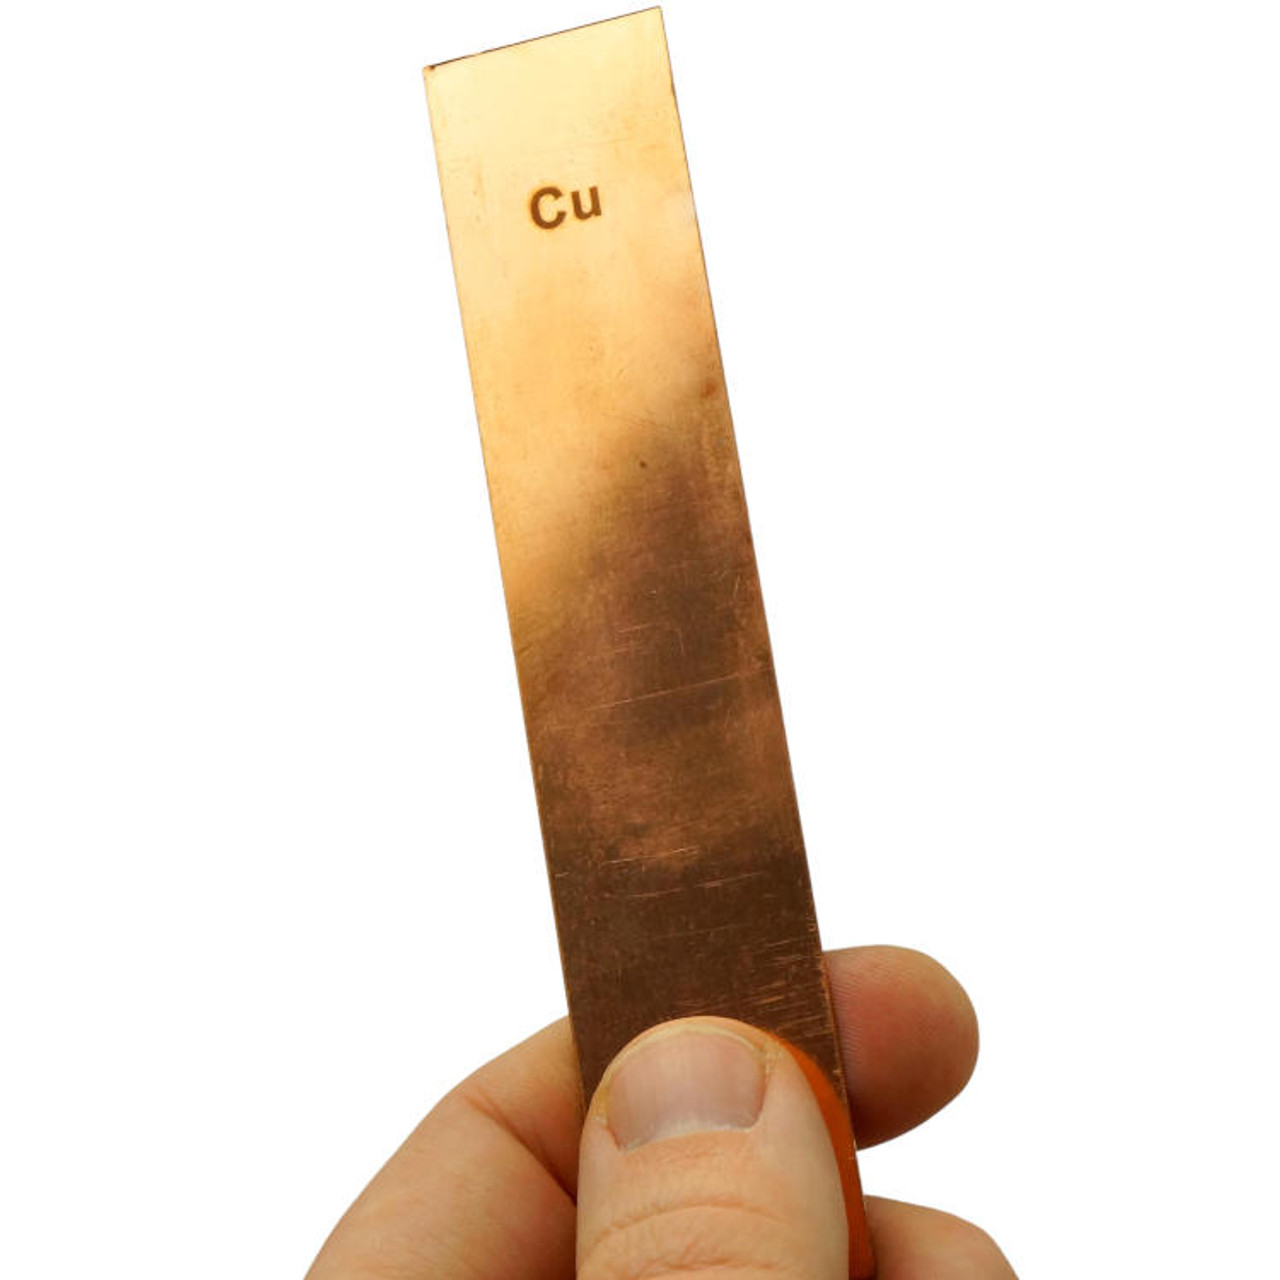 COPPER STRIP FOR CRAFTS OR SCIENCE FAIR (1-STRIP)